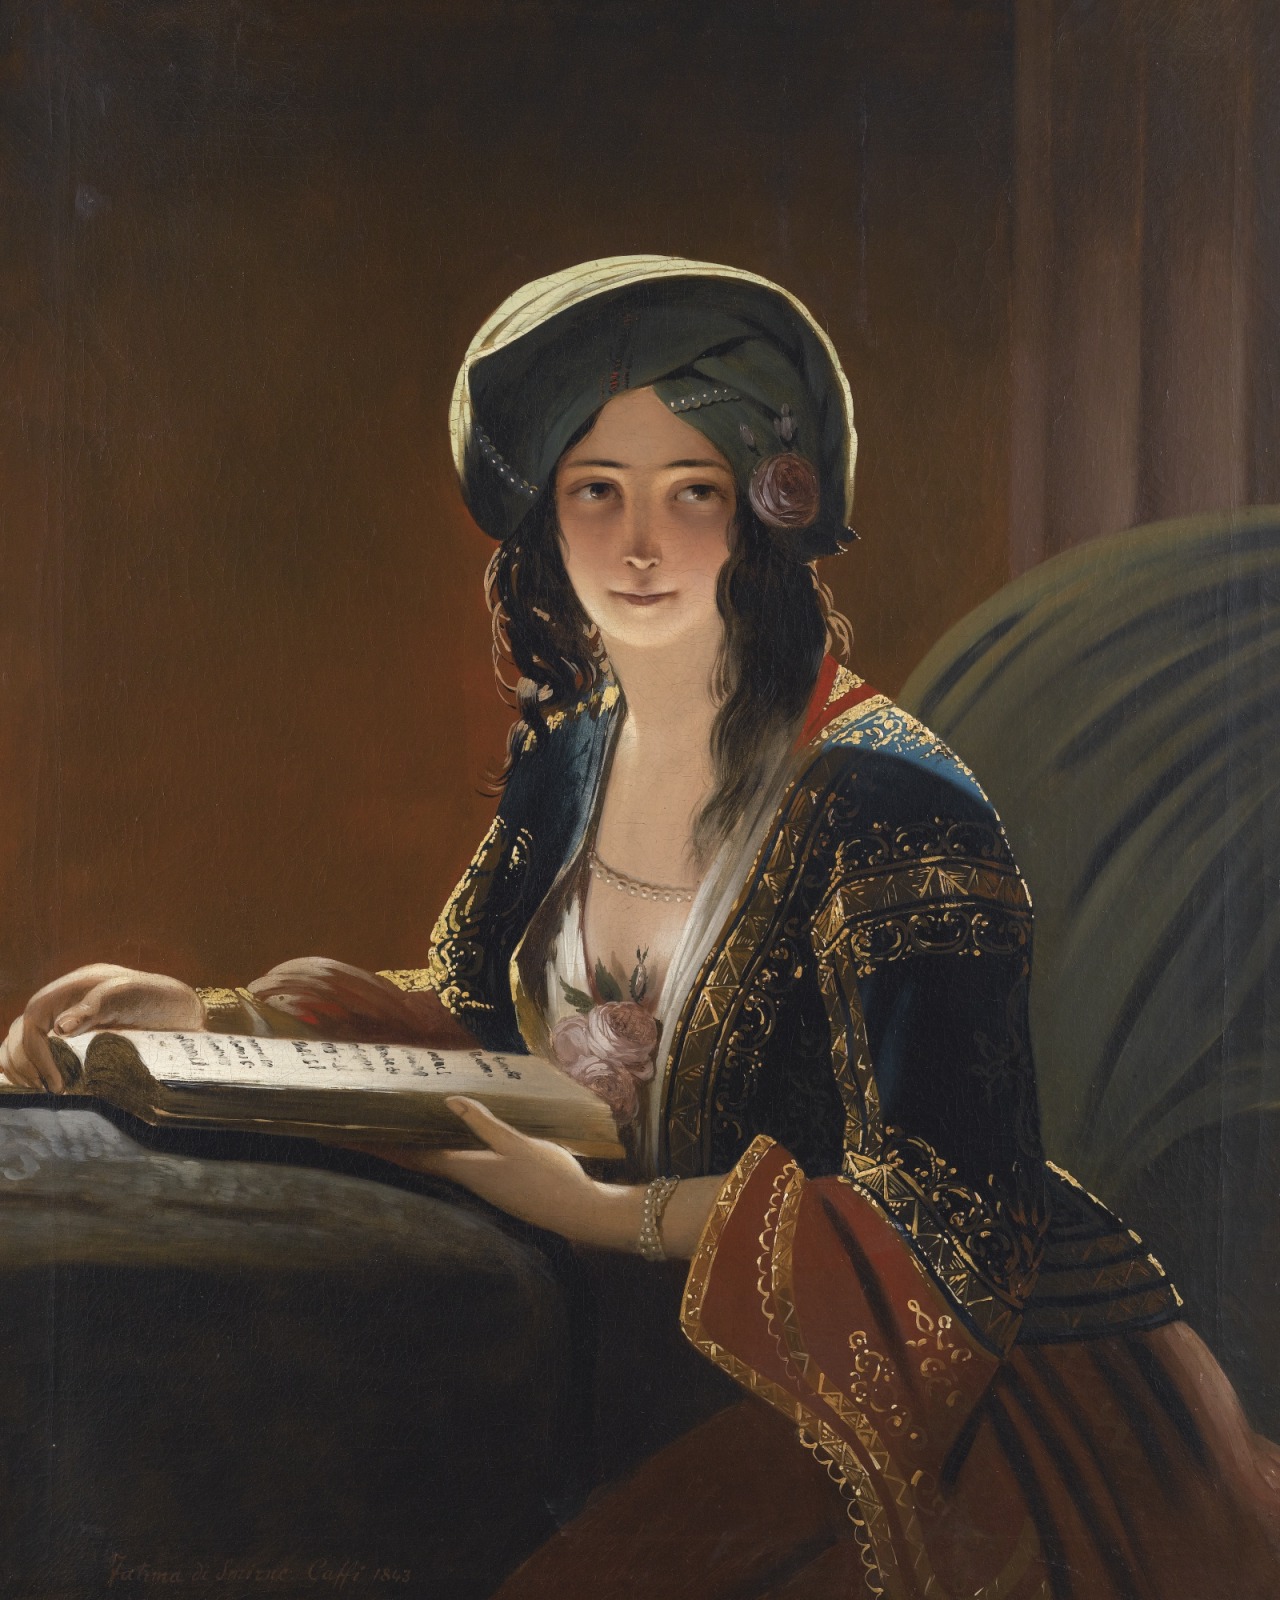 Fatima di Smirne (1843). Ippolito Caffi (Italian, 1809-1866). Oil on canvas.
This work comes very close to a painting of 1839 by the Austrian Biedermeier painter Friedrich von Amerling. It is possible that Caffi was copying Amerling directly or that...